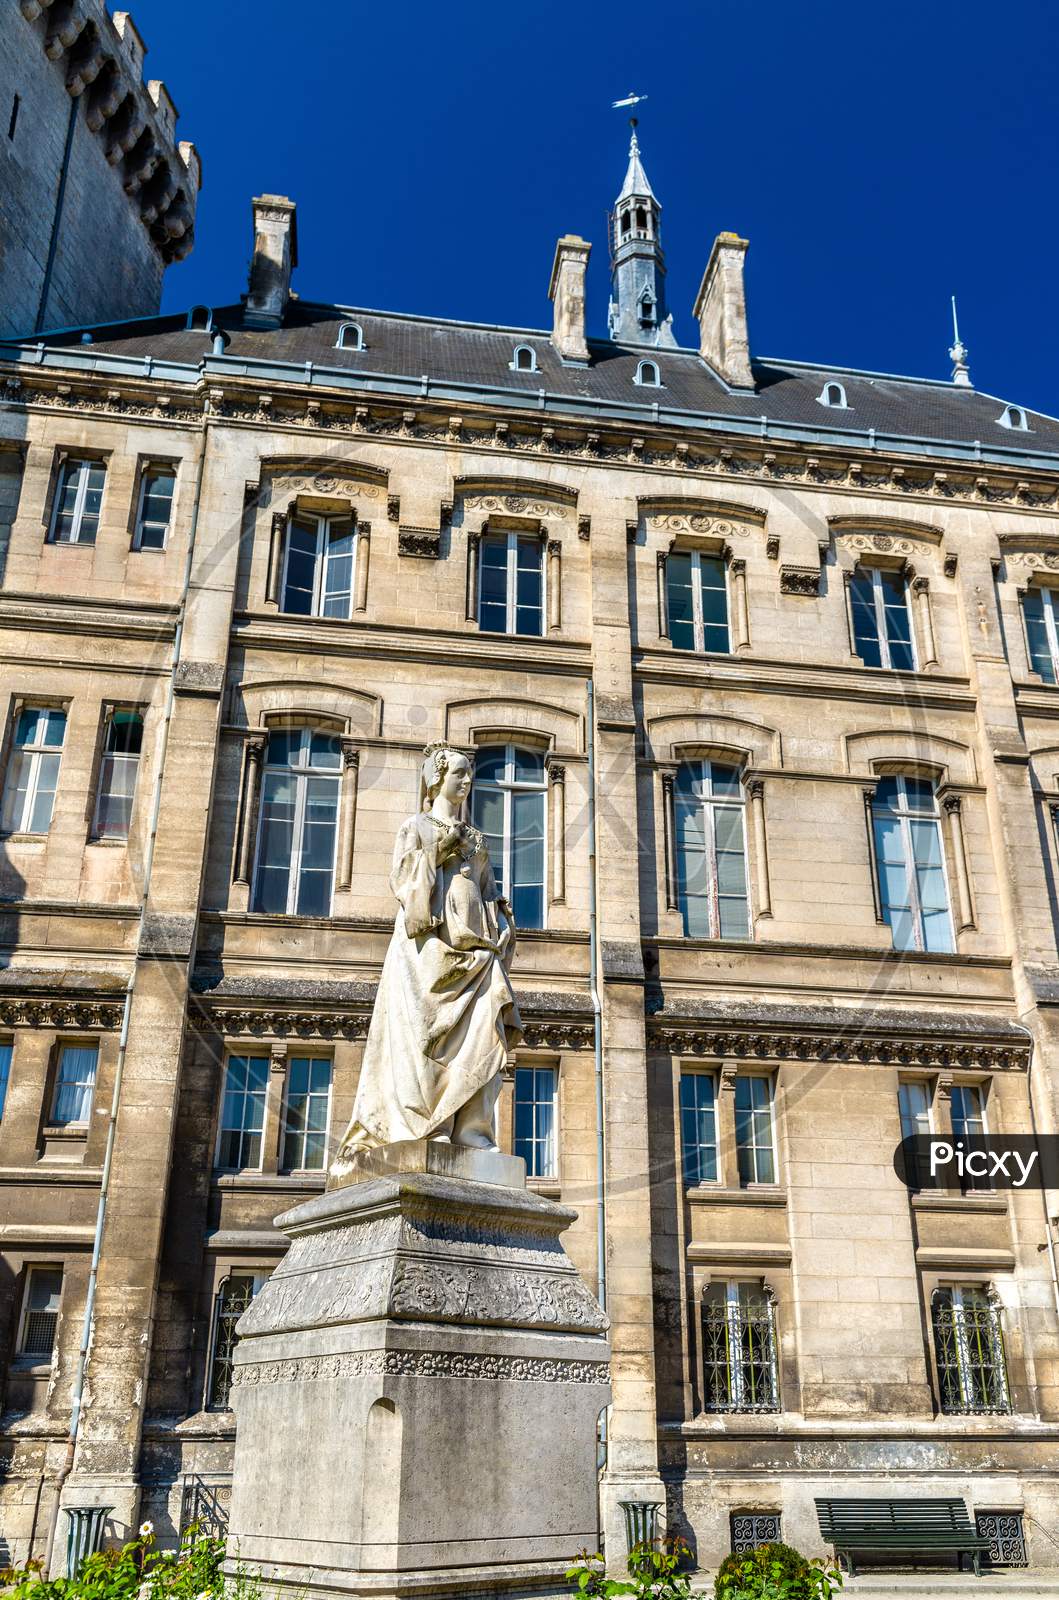 Marguerite Of Angouleme Statue At The City Hall Of Angouleme - France